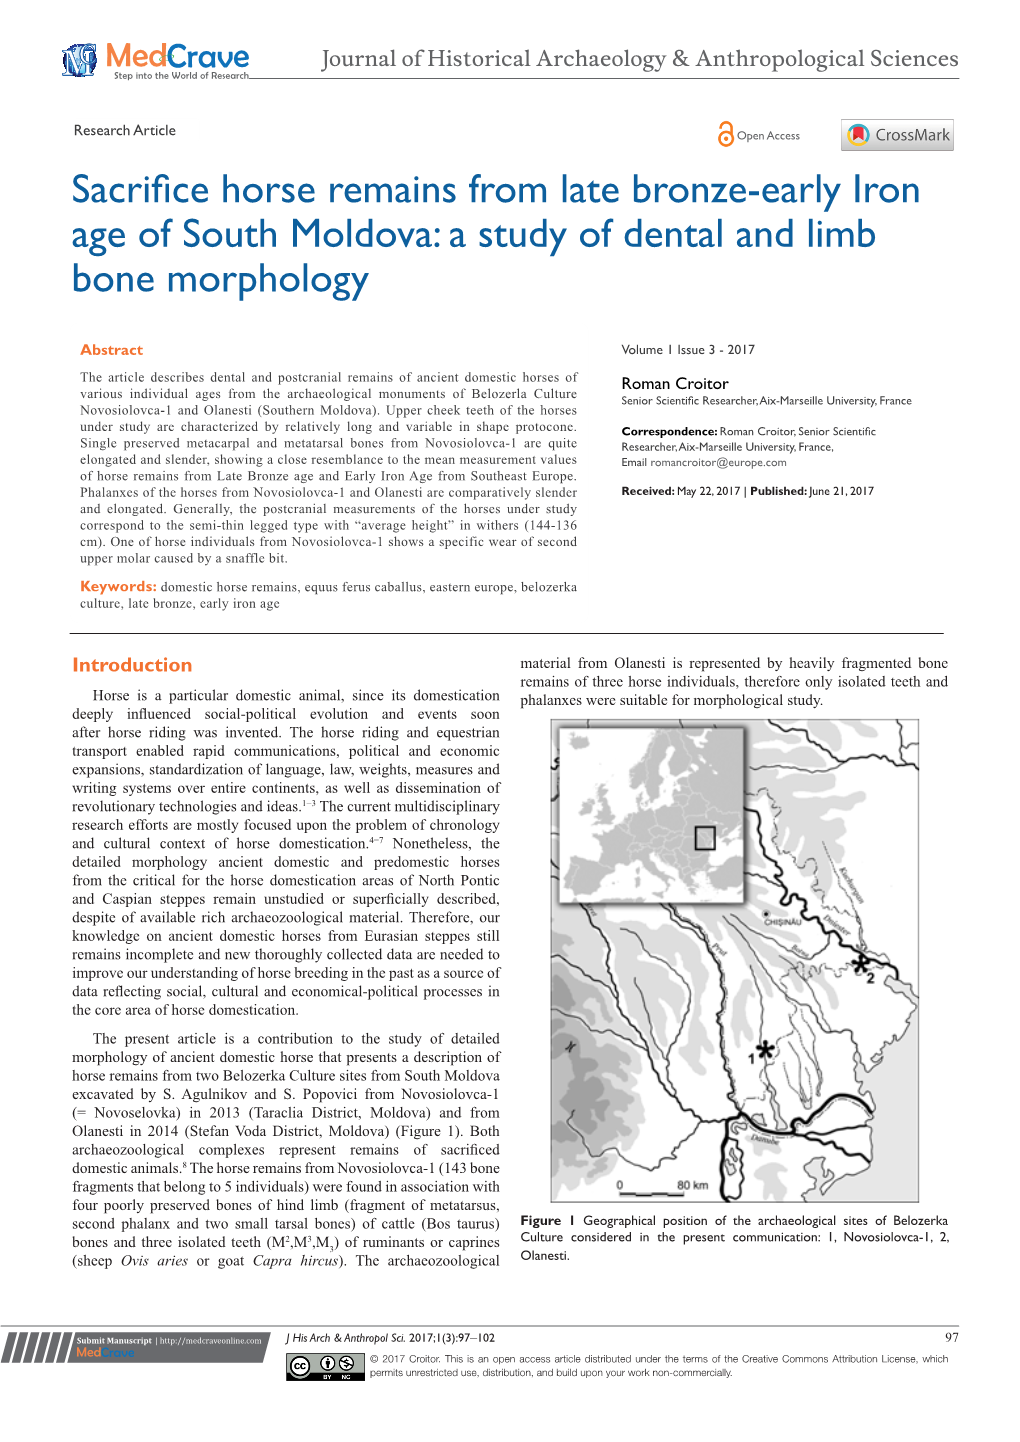 Sacrifice Horse Remains from Late Bronze-Early Iron Age of South Moldova: a Study of Dental and Limb Bone Morphology